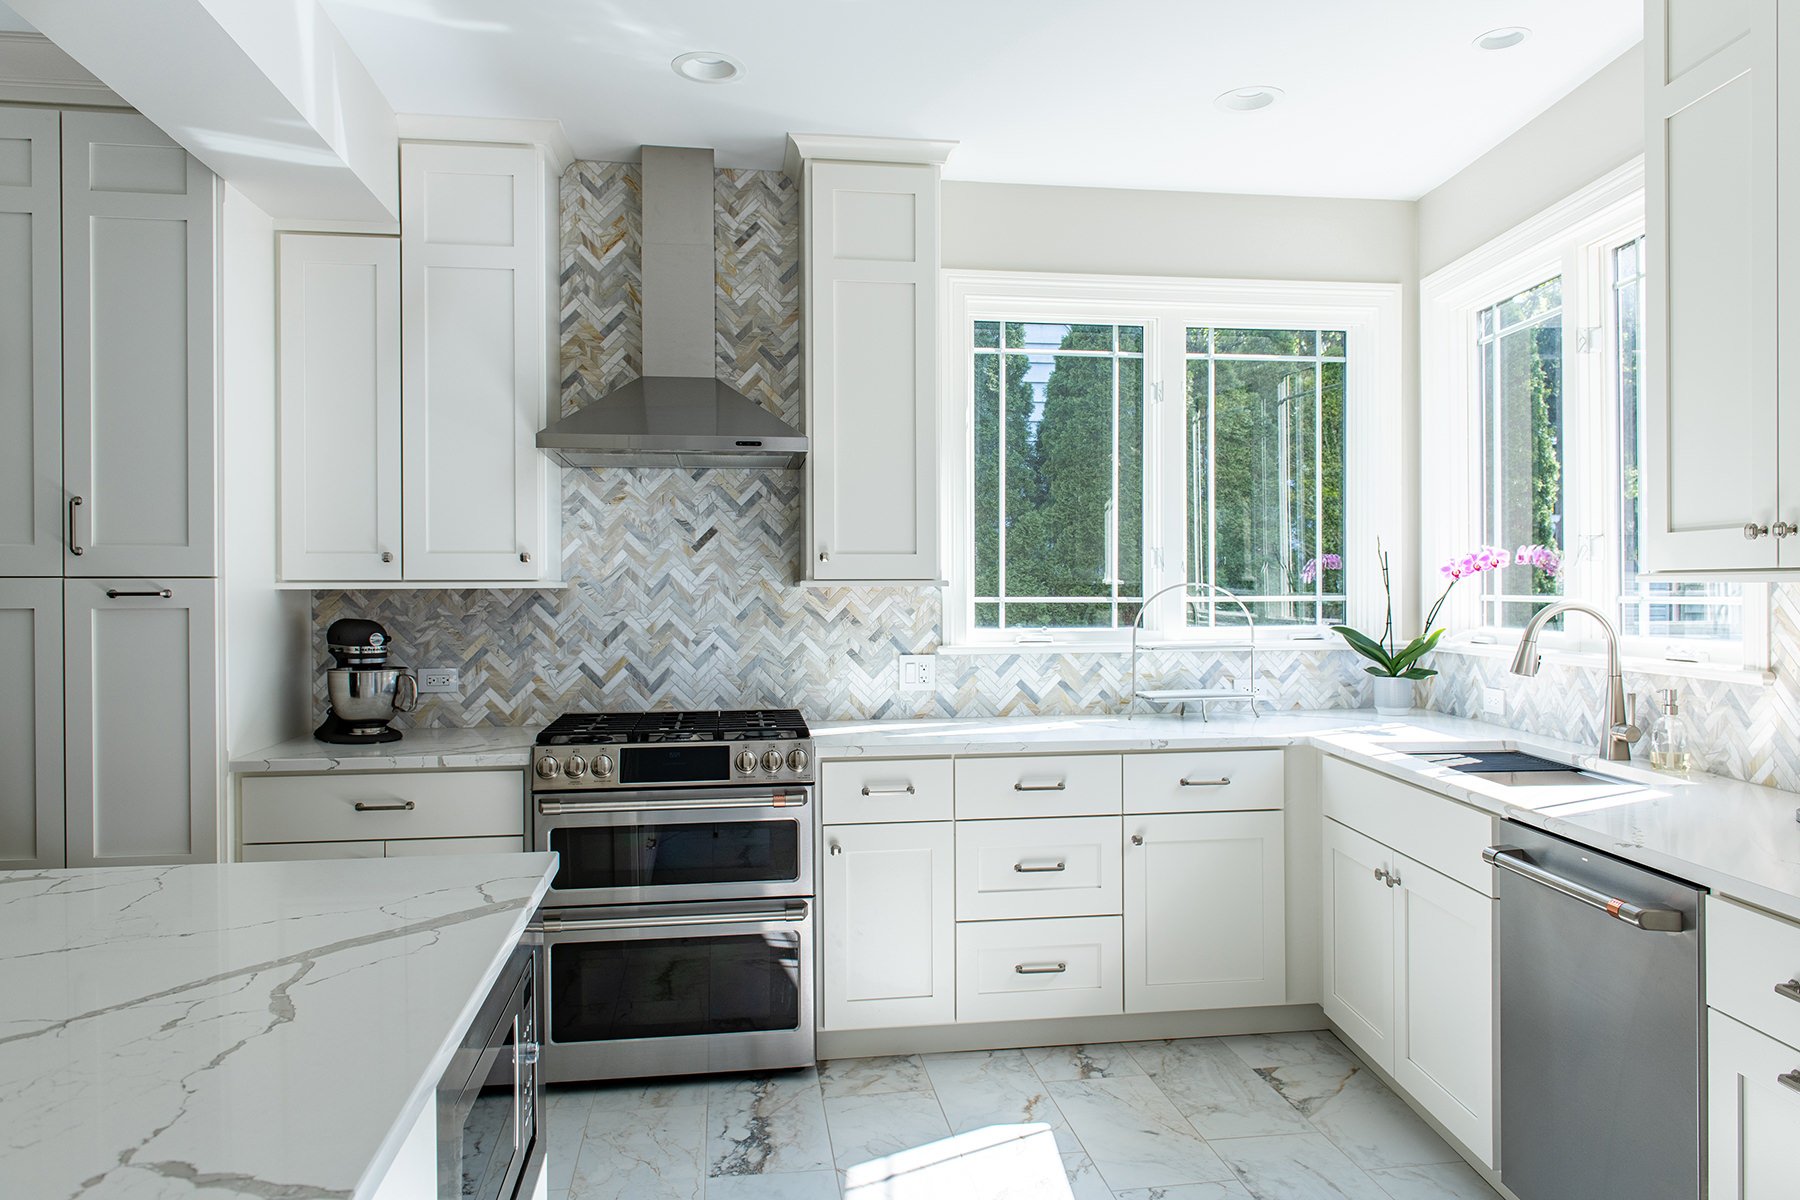 White kitchen with stainless steel appliances, herringbone backsplash and open natural lighting.